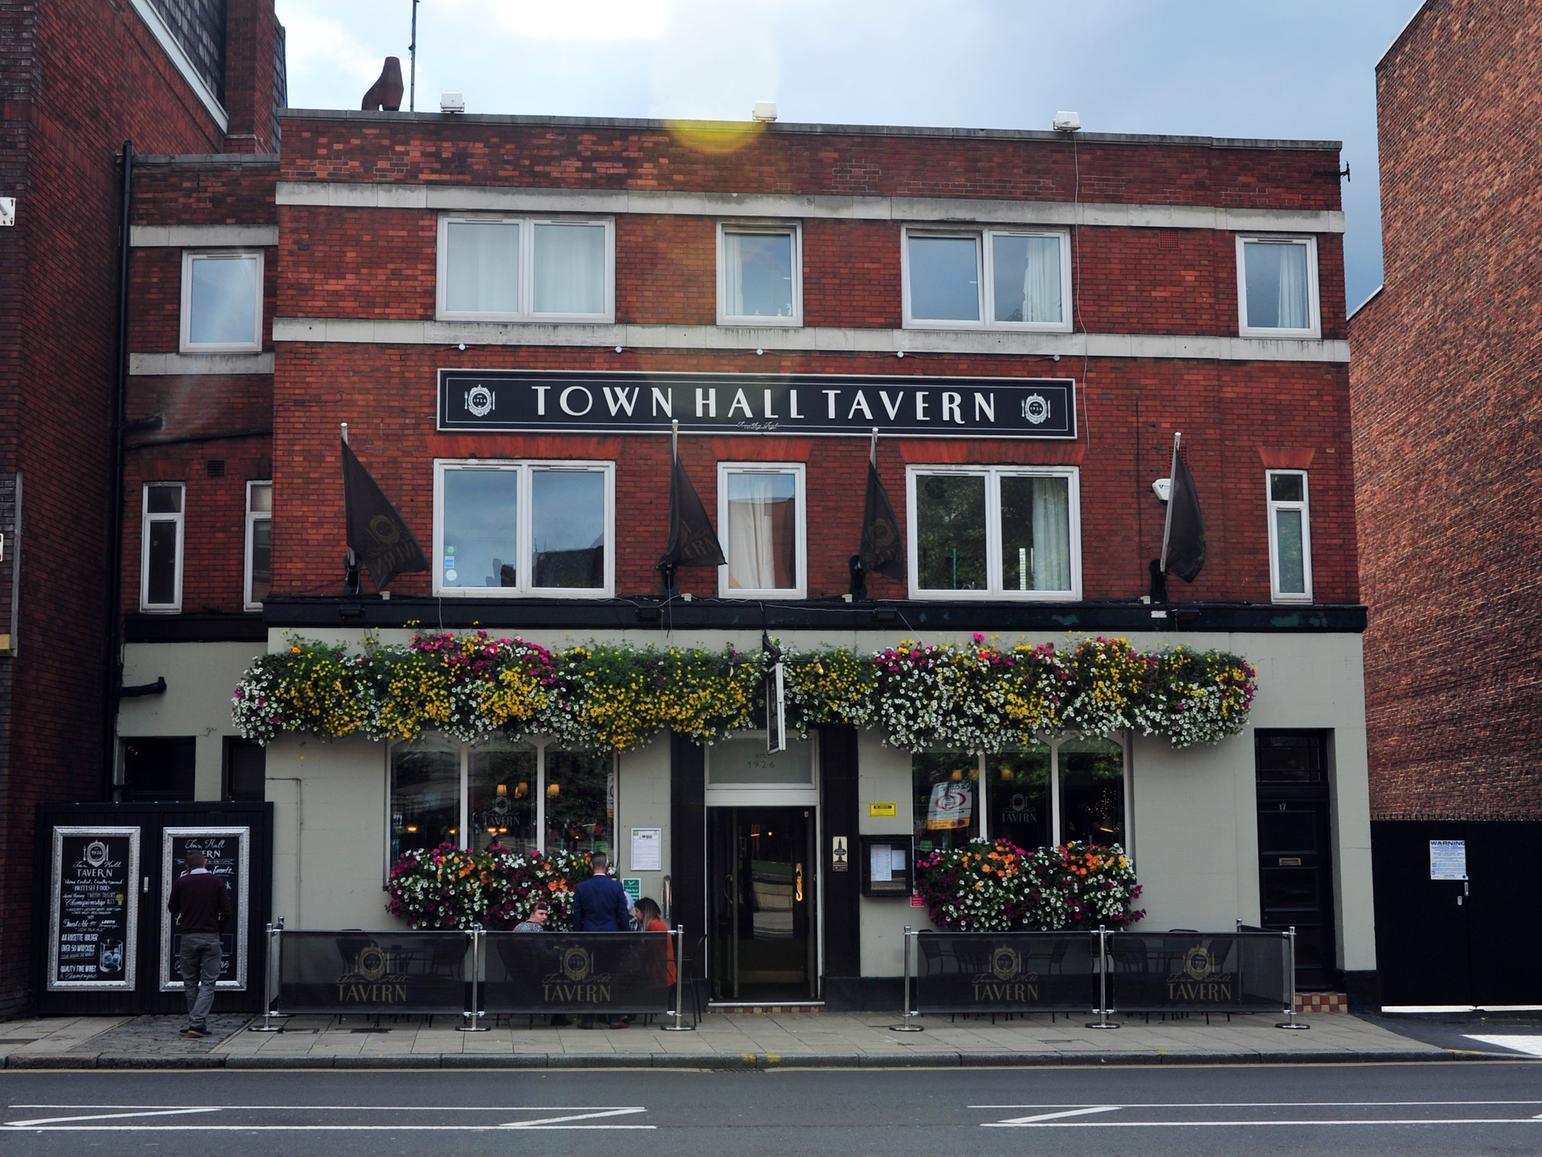 The city centre's Town Hall Tavern came eighth on the list. One TripAdvisor reviewer said they were "Best fish and chips ever in a pub."